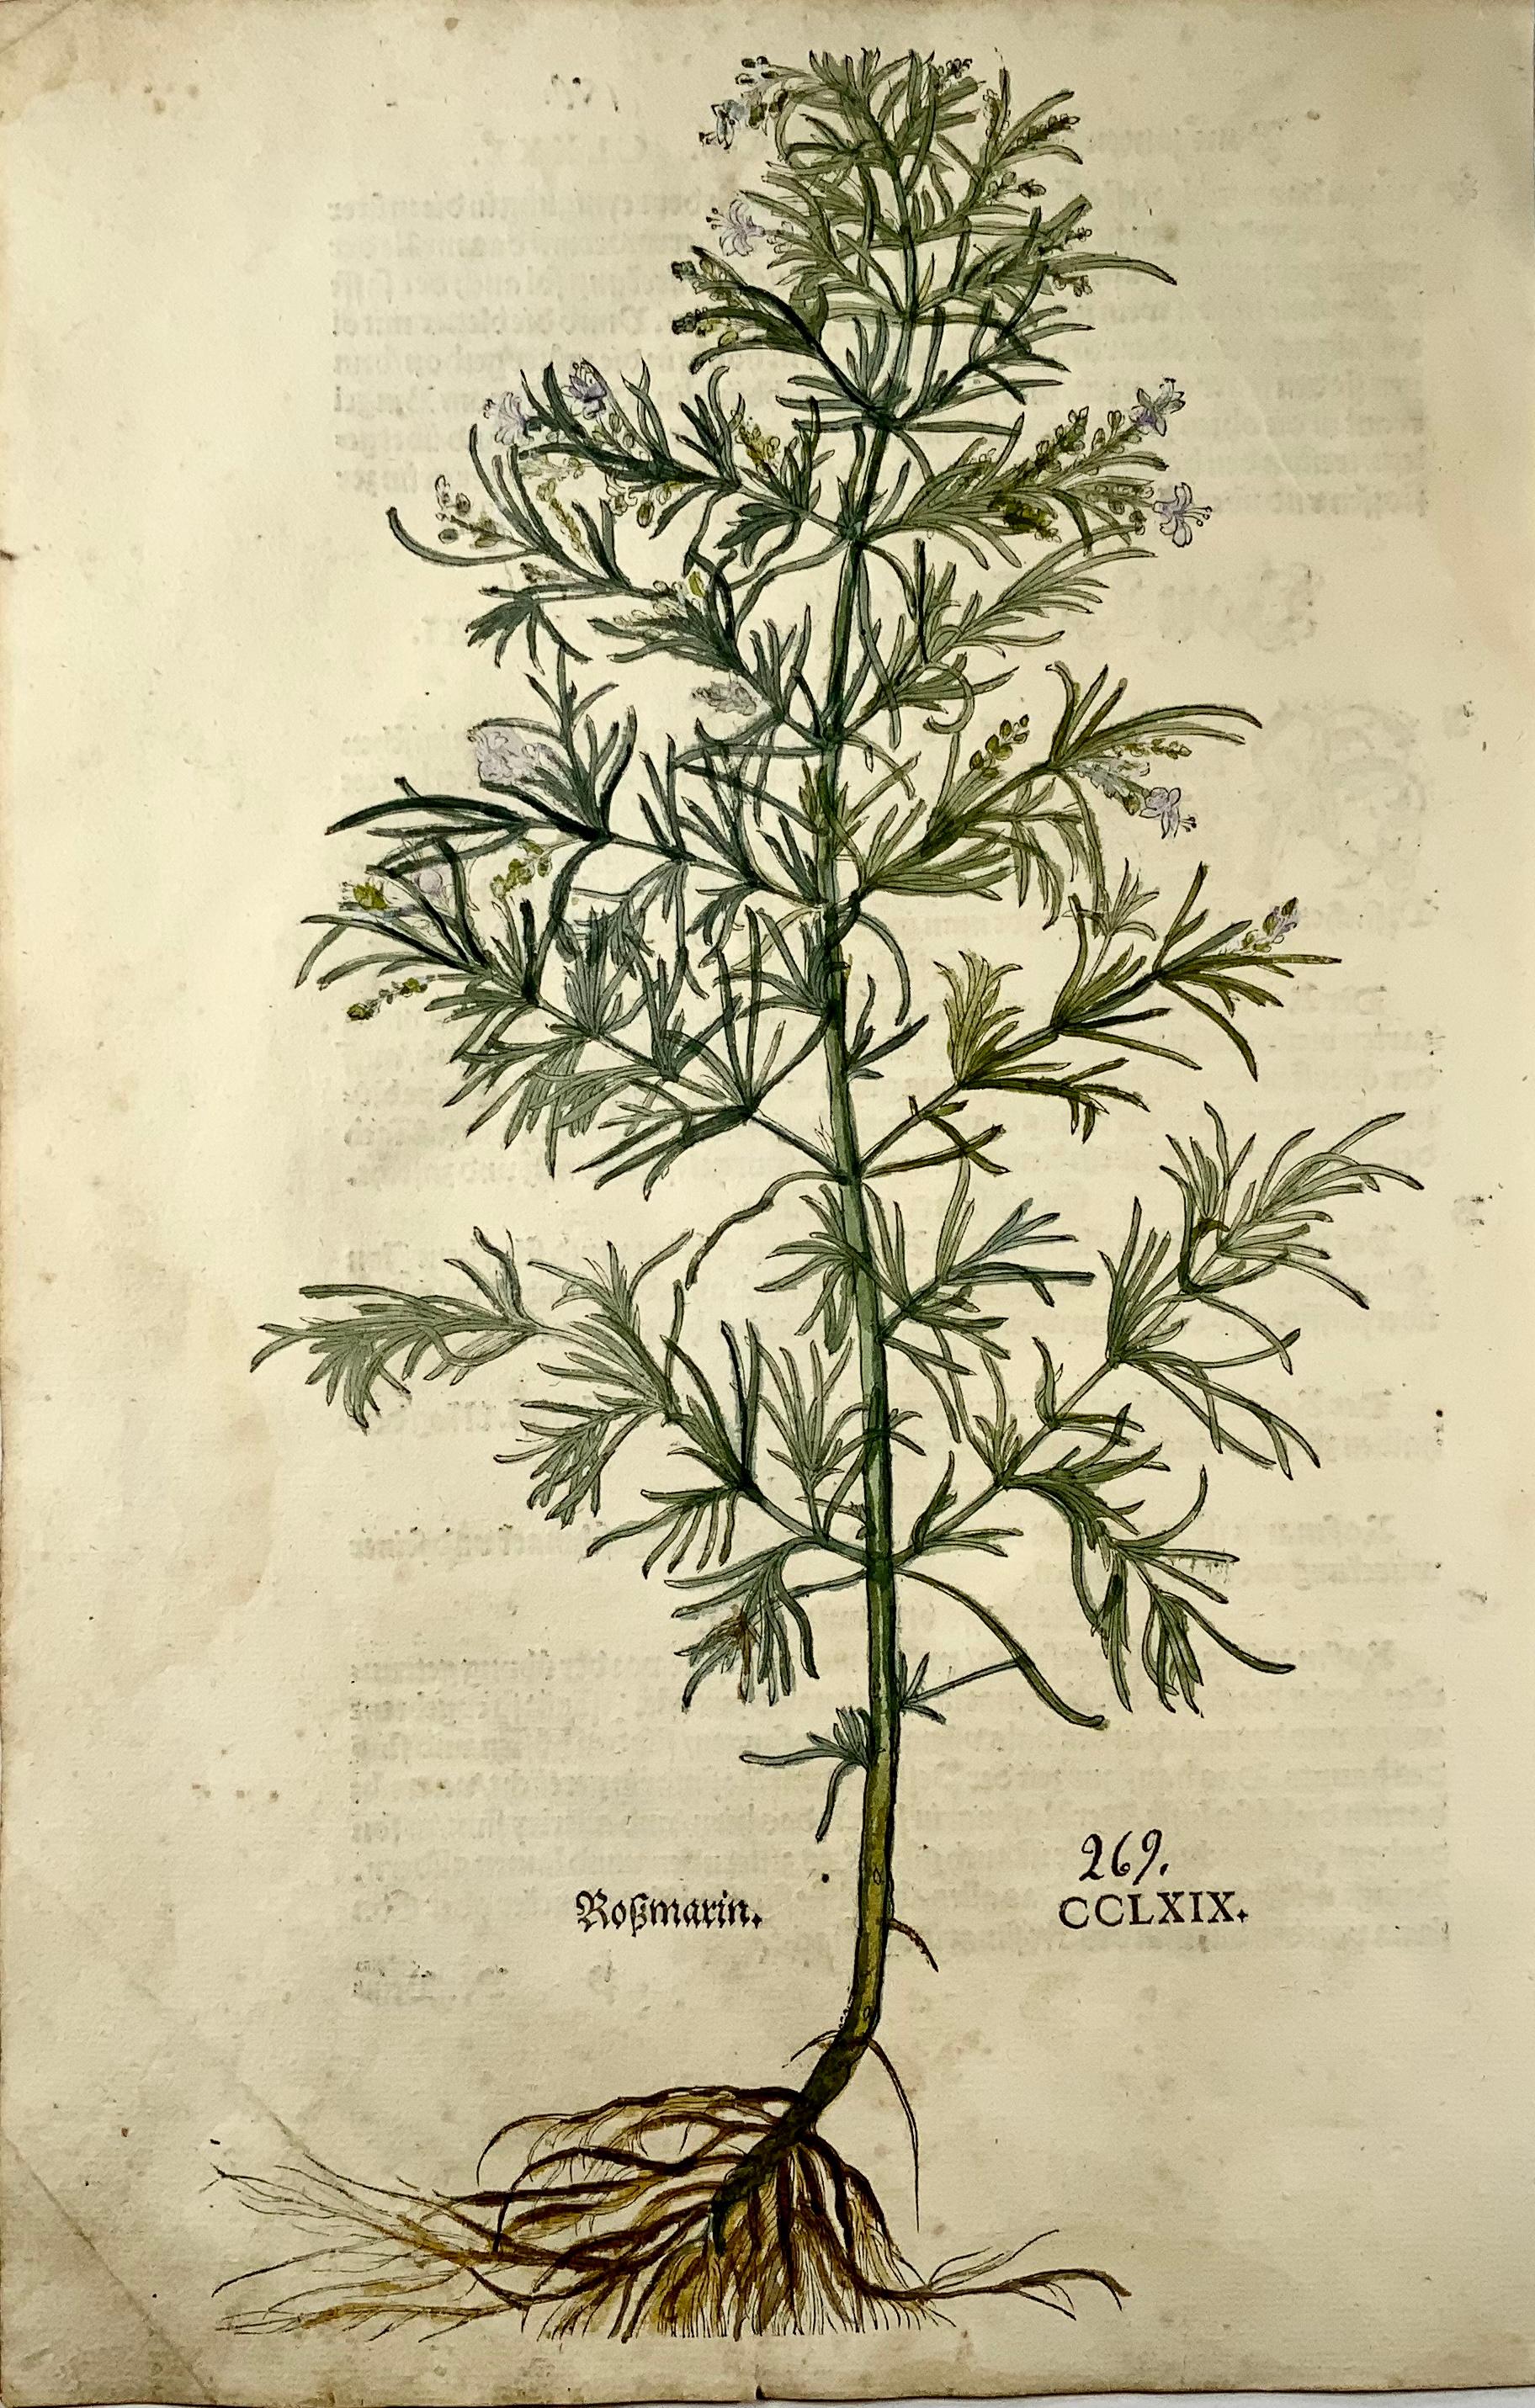 Rosemary is a fragrant evergreen herb native to the Mediterranean. It is used as a culinary condiment, to make bodily perfumes, and for its potential health benefits.

Superb hand coloured woodcut in FOLIO size from:

Leonhart Fuchs

New